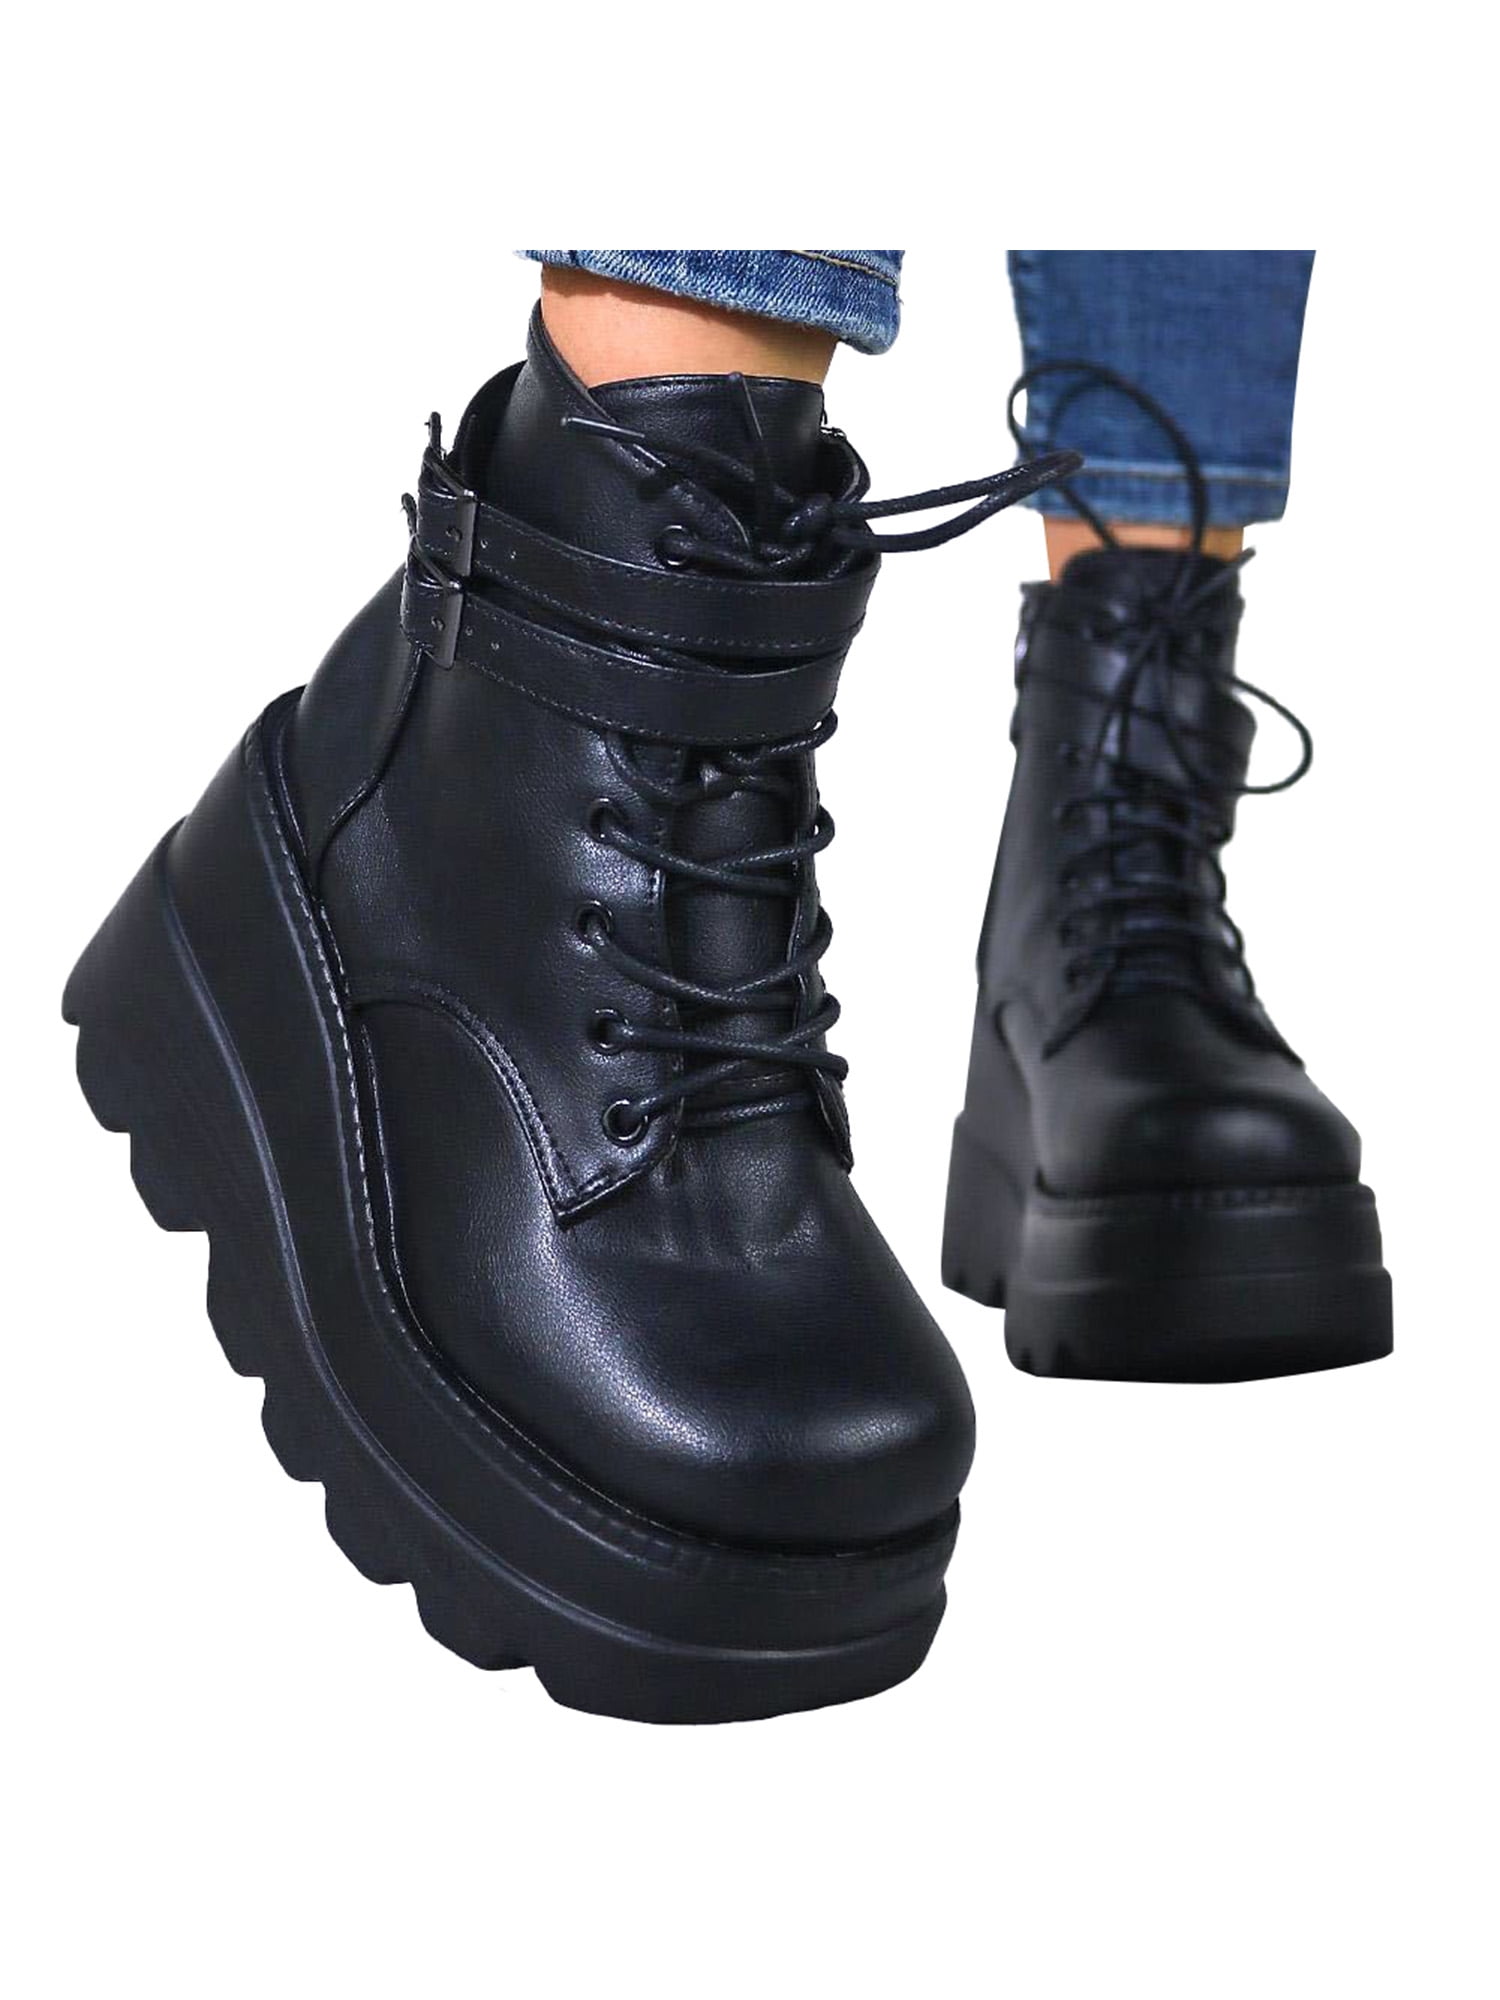 Women Fashion Lace Up Creeper Wedge Boot High Platform Square Toe Leisure Shoes 